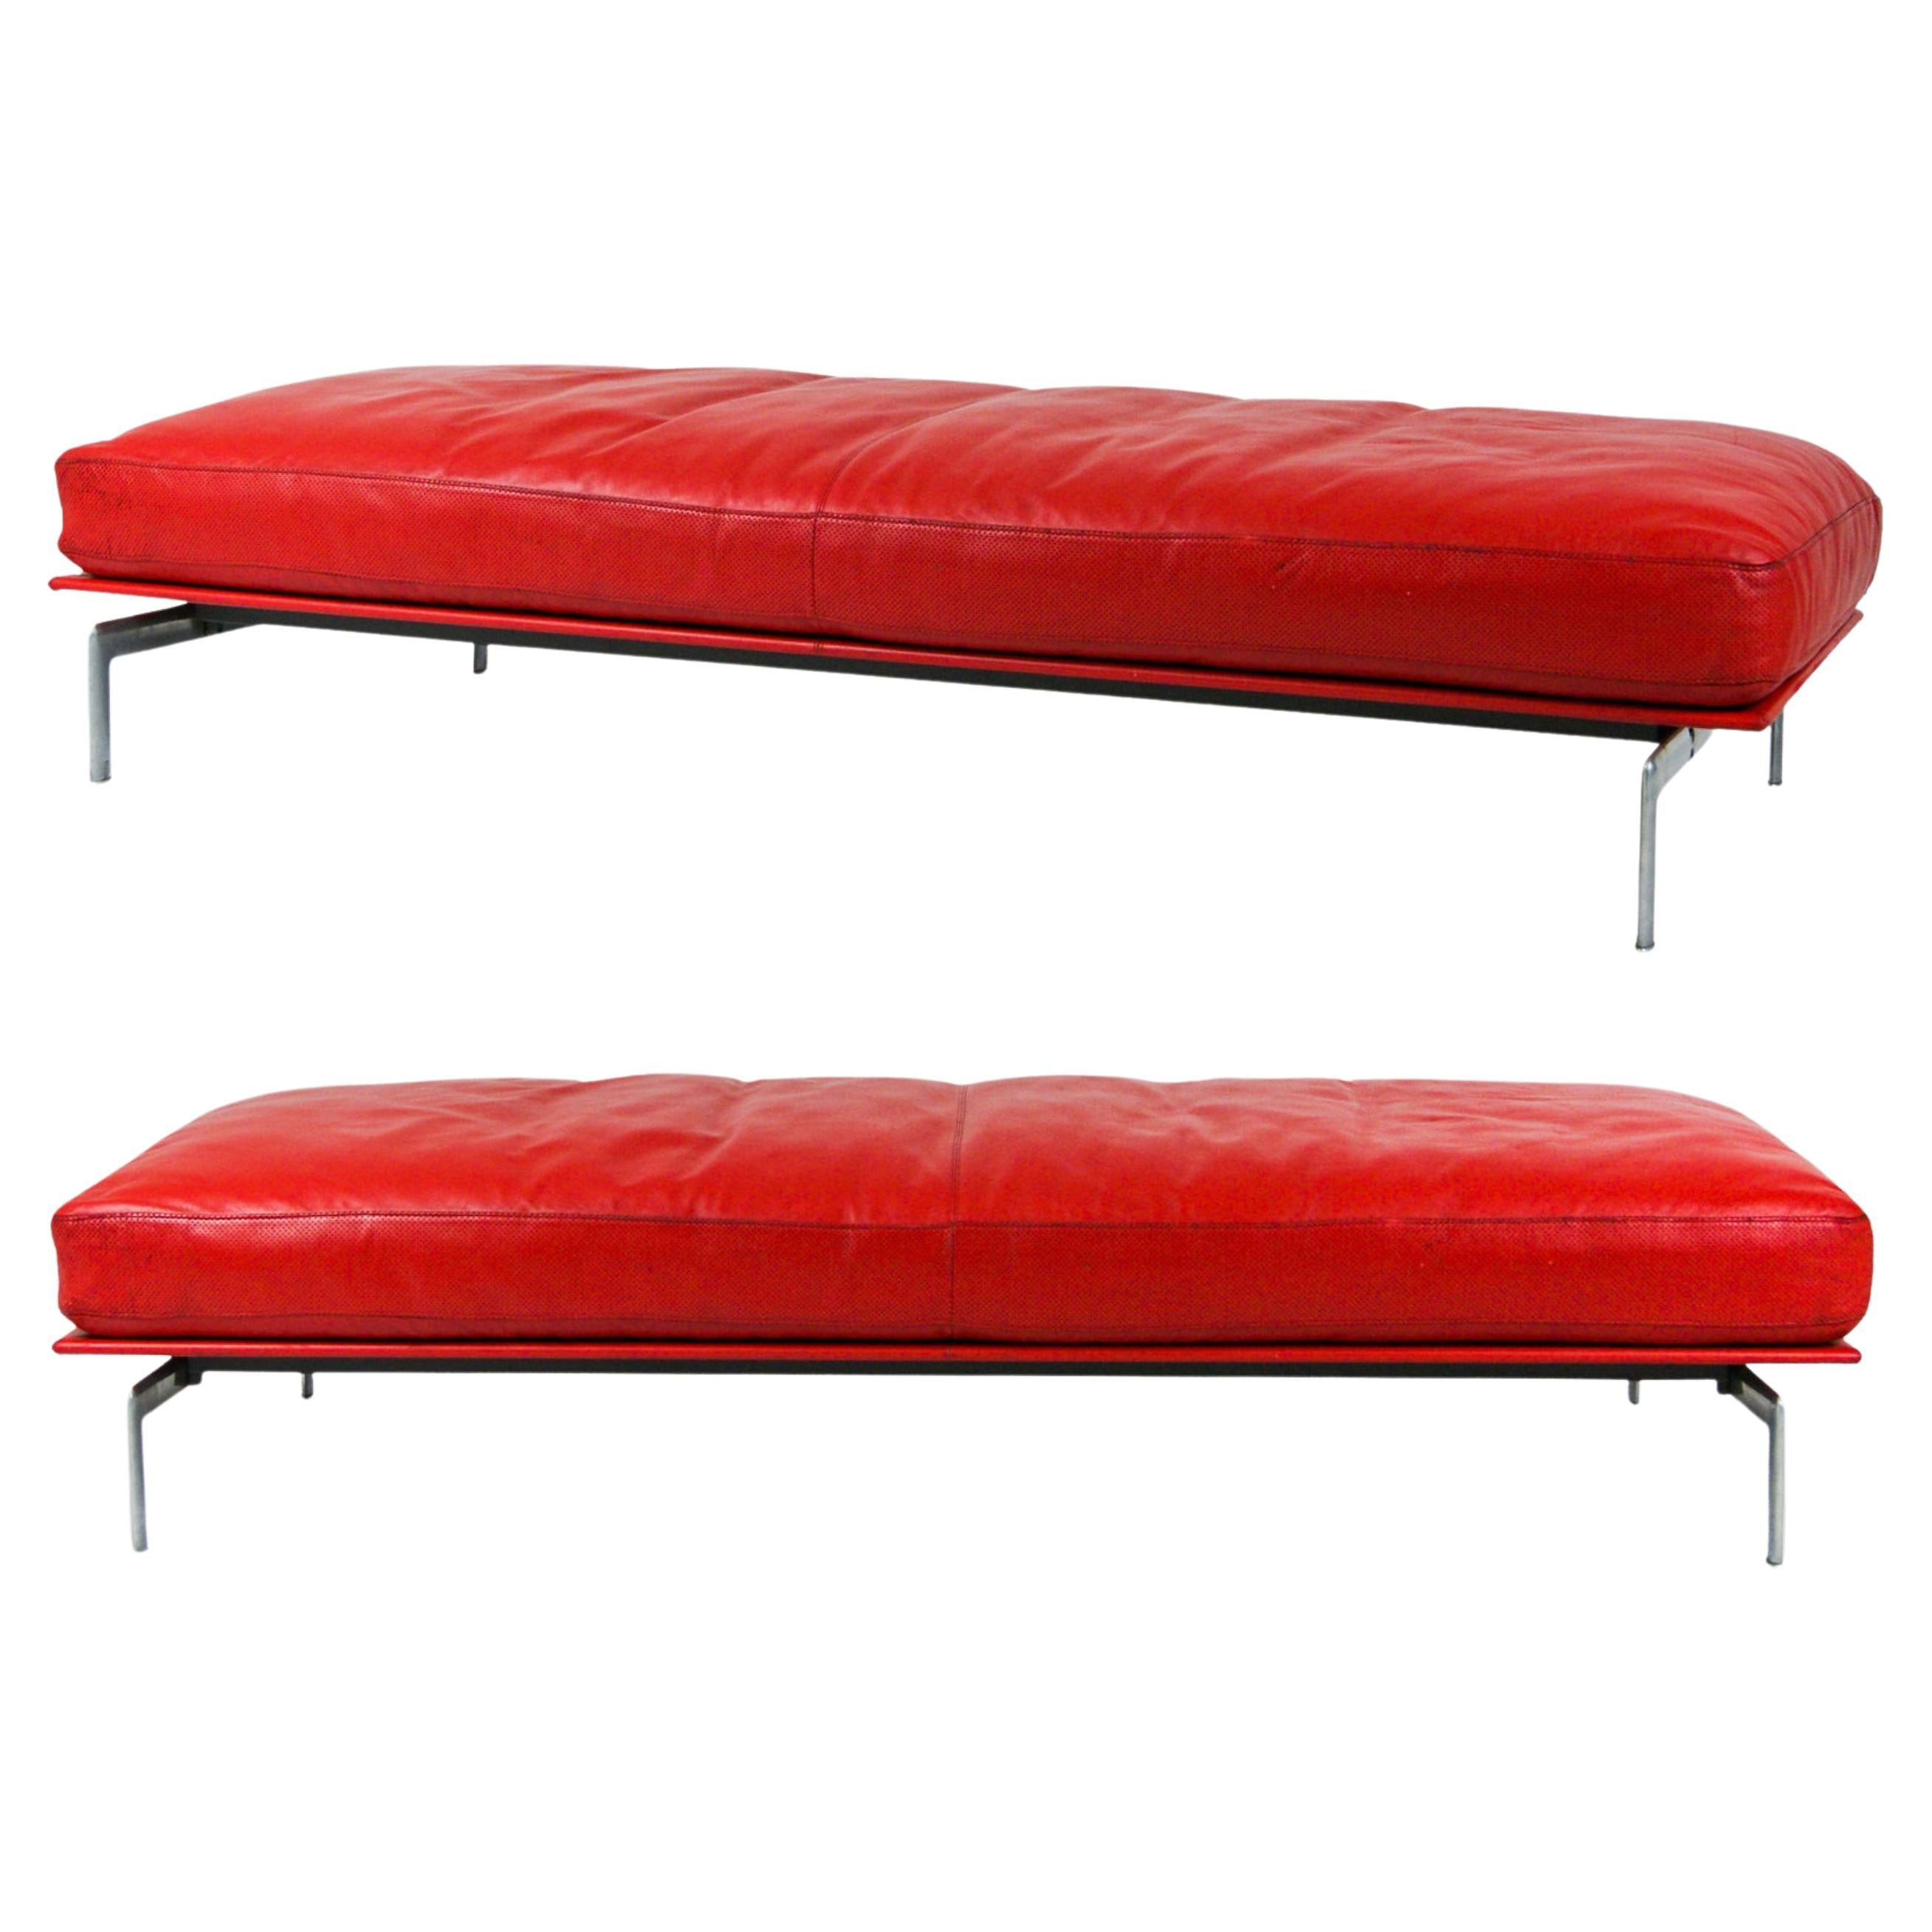 Pair Diesis Daybeds or Benches by Paolo Nava & Antonio Citterio for B&B Italia For Sale